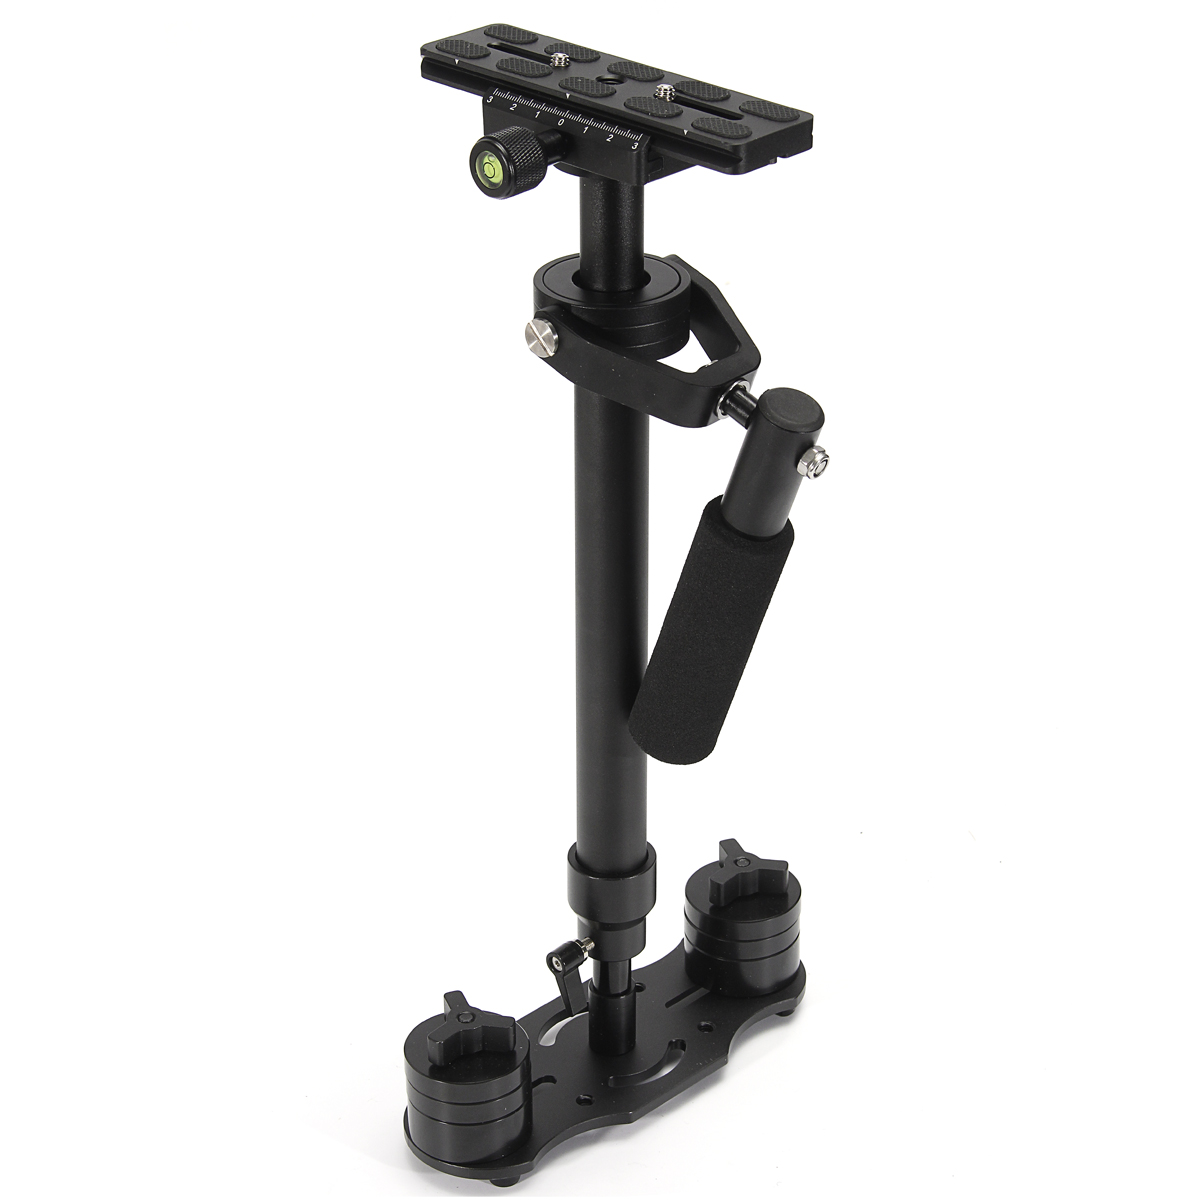 

S60T Aluminum Alloy Handheld Steady Stabilizer With Carry Bag For Camcorder Cameras